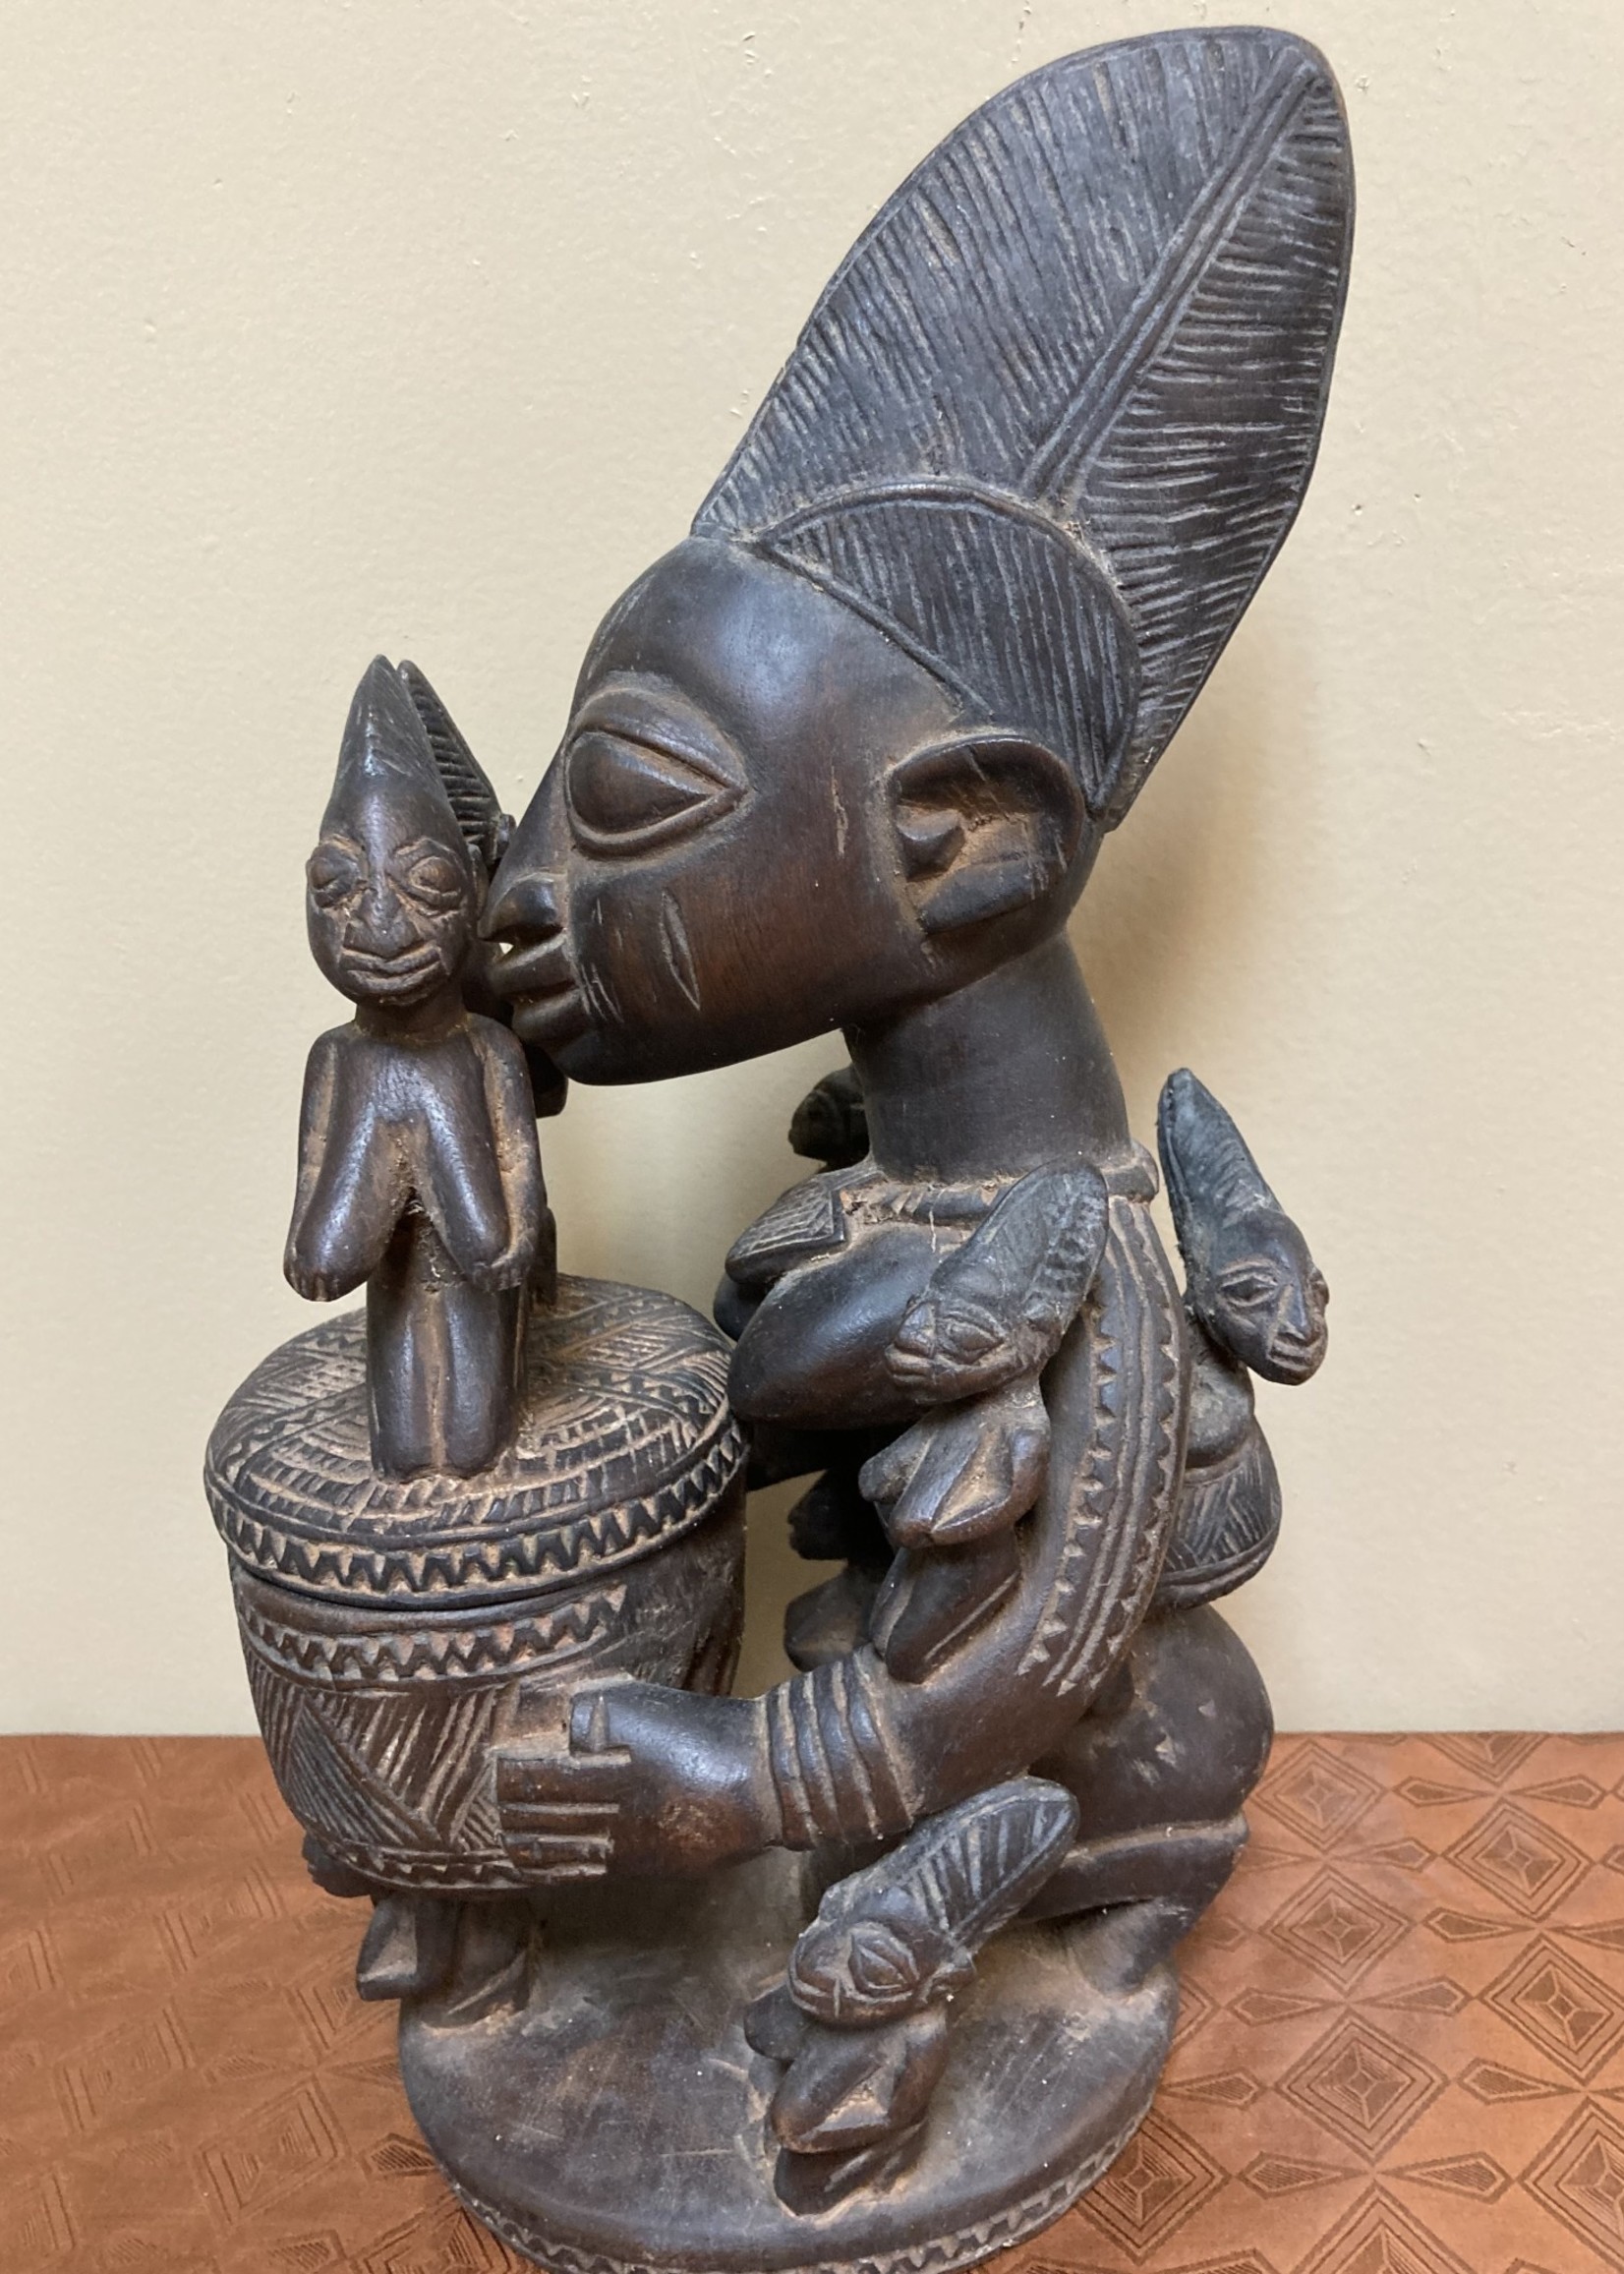 Yoruba Yoruba Ajere. Used for divination. Most likely held cola nut, which are used in one of two forms of divination. 12 7/8 " h. x 6 5/8 " deep front to back. Nigeria